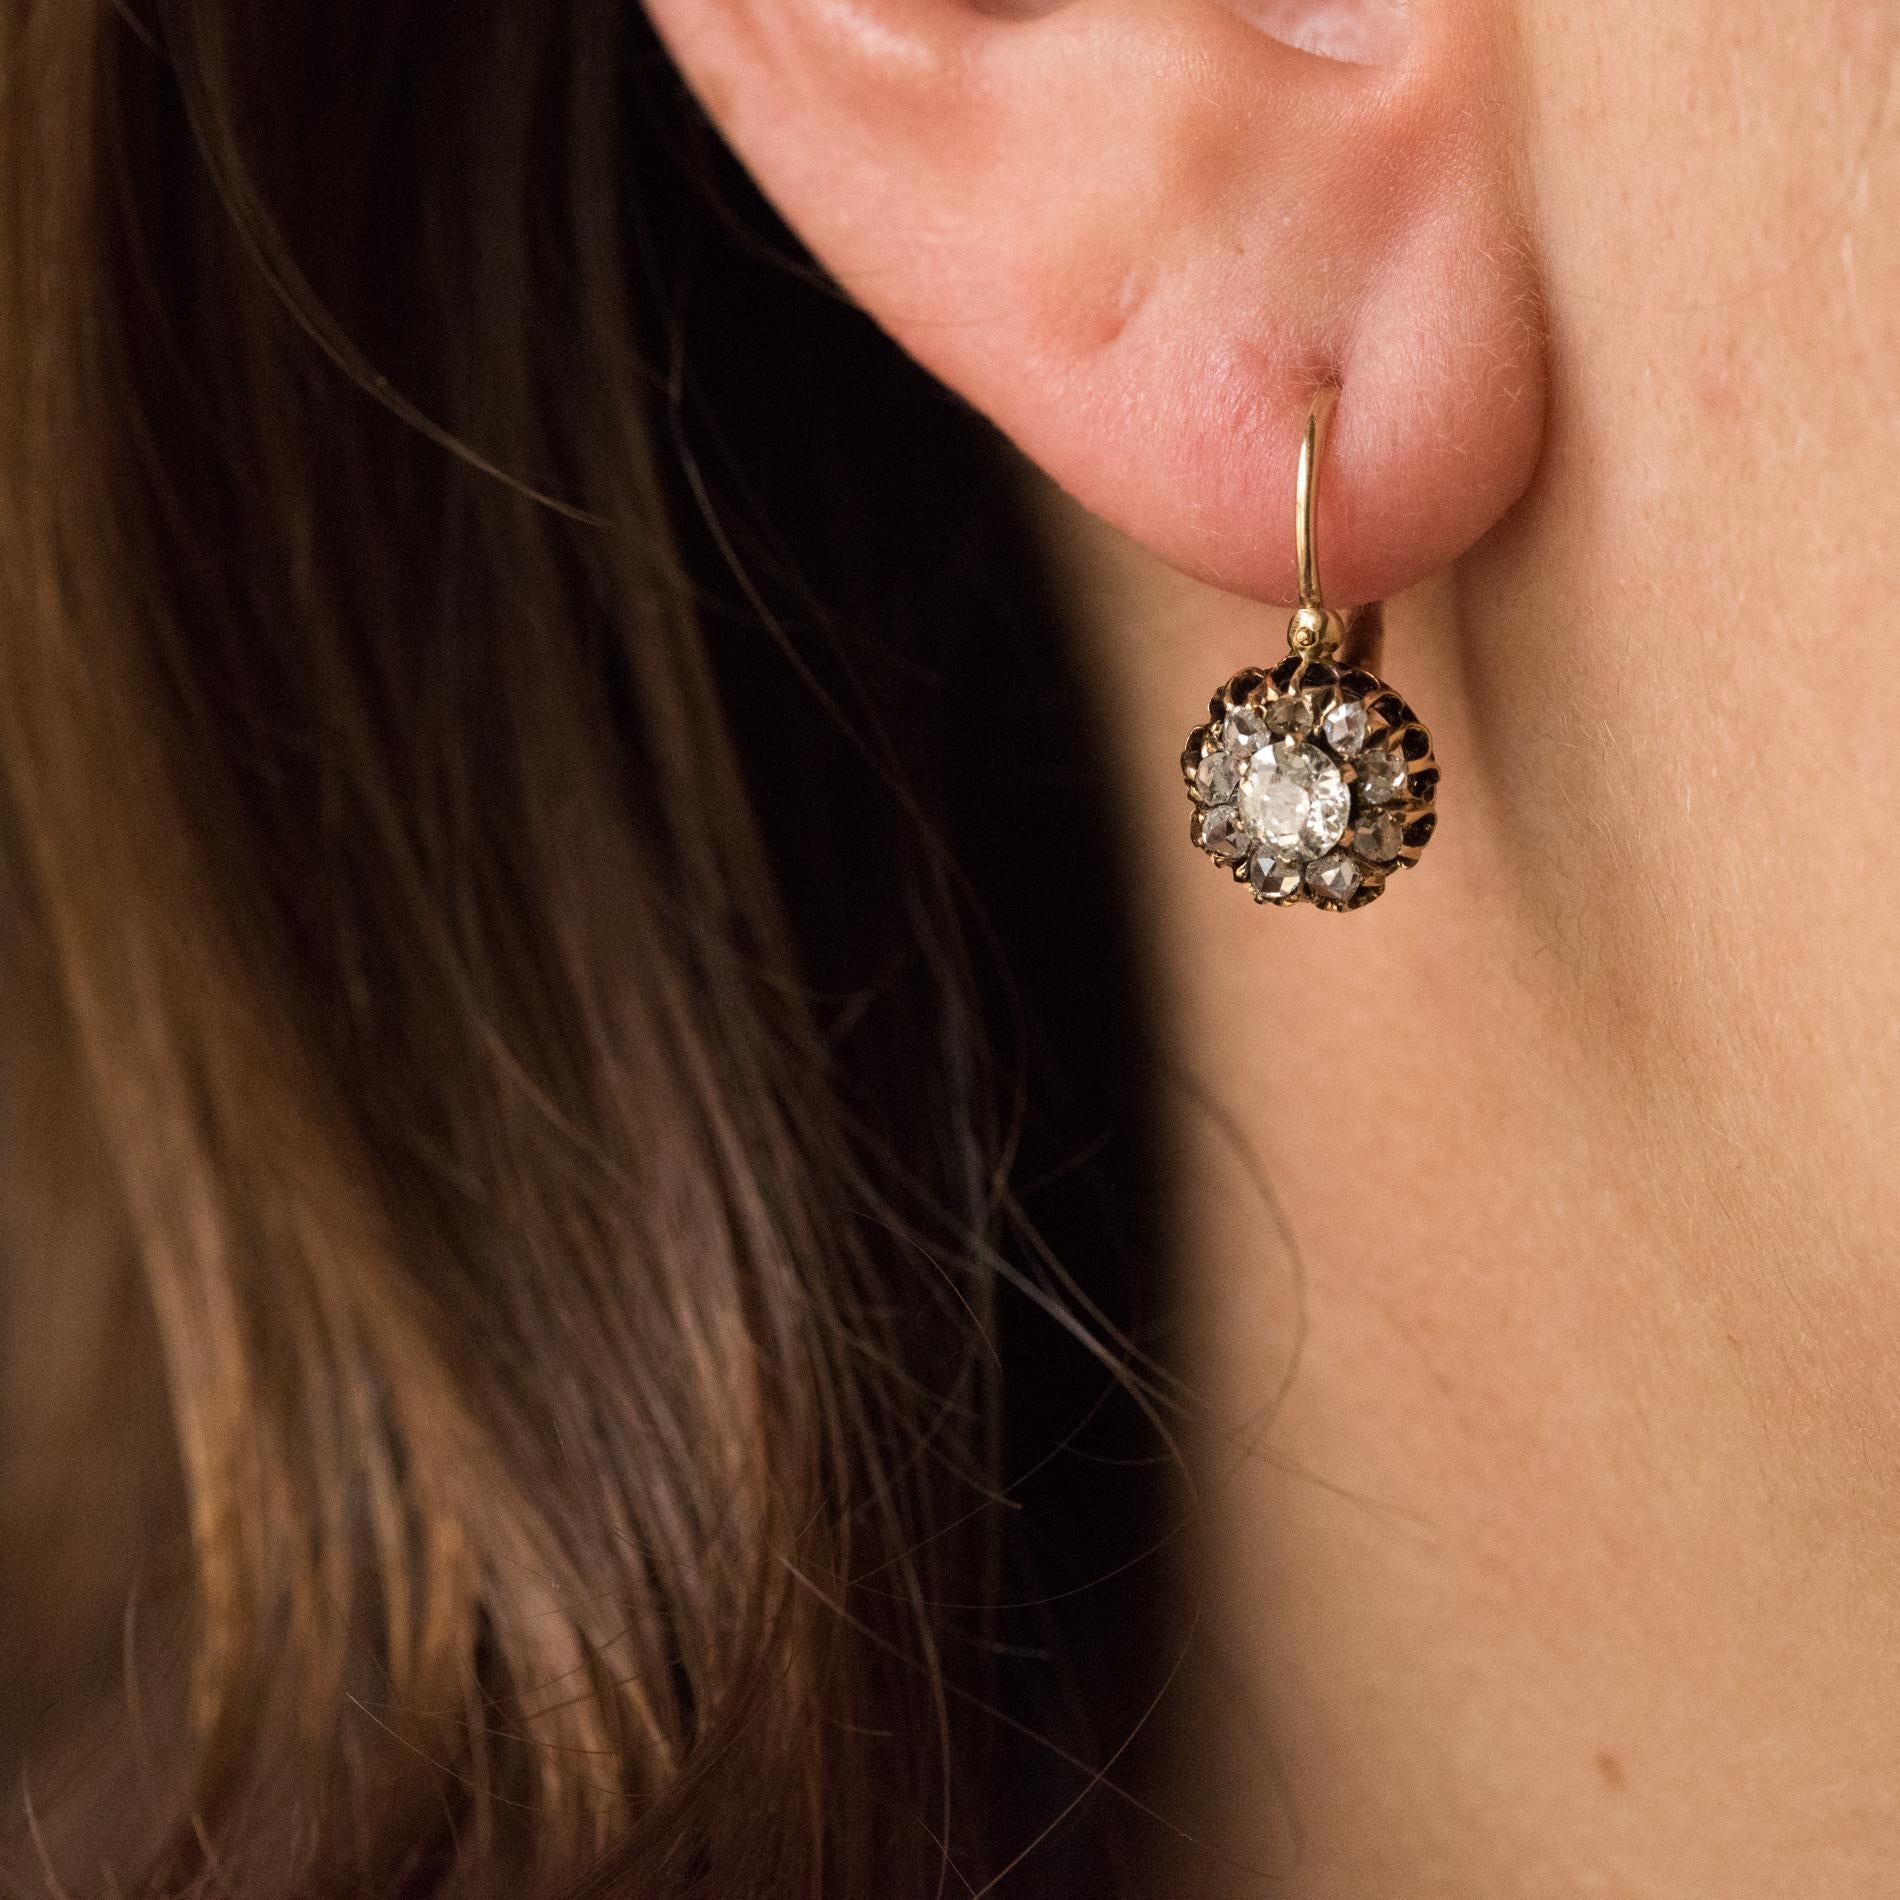 Pair of rose gold earrings, 750 thousandths, 18 carats.
Called sleepers earrings, round shape, each is set, in the center, with claws of an antique- cut diamond surrounded by rose- cut diamonds. The attachment system is forward. The basket is